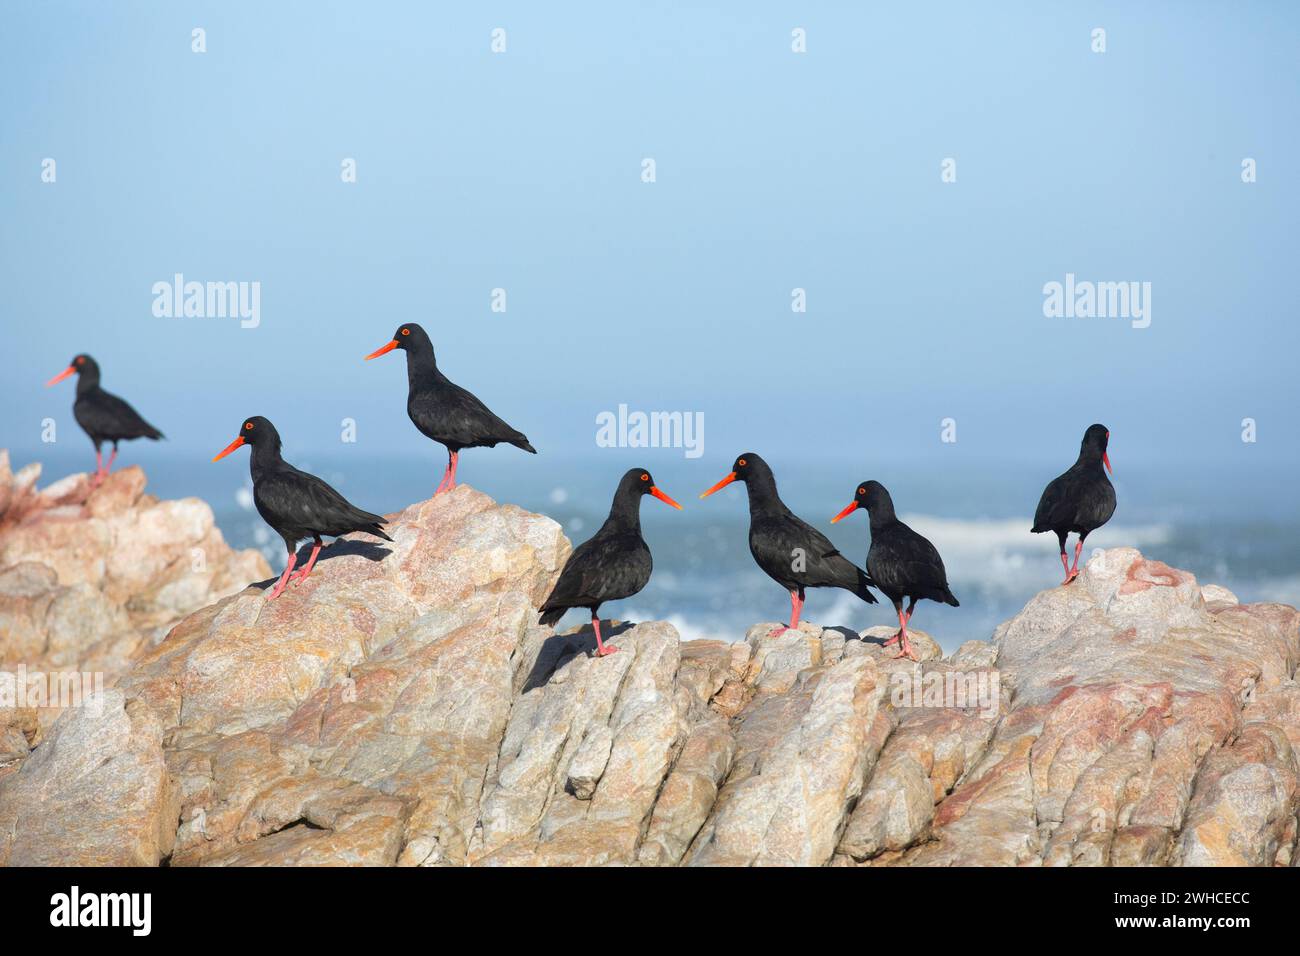 South Africa, Western Cape Province, Overstrand, Black Oystercatcher, Haematopus moquini, Ocean, power in nature, Stock Photo